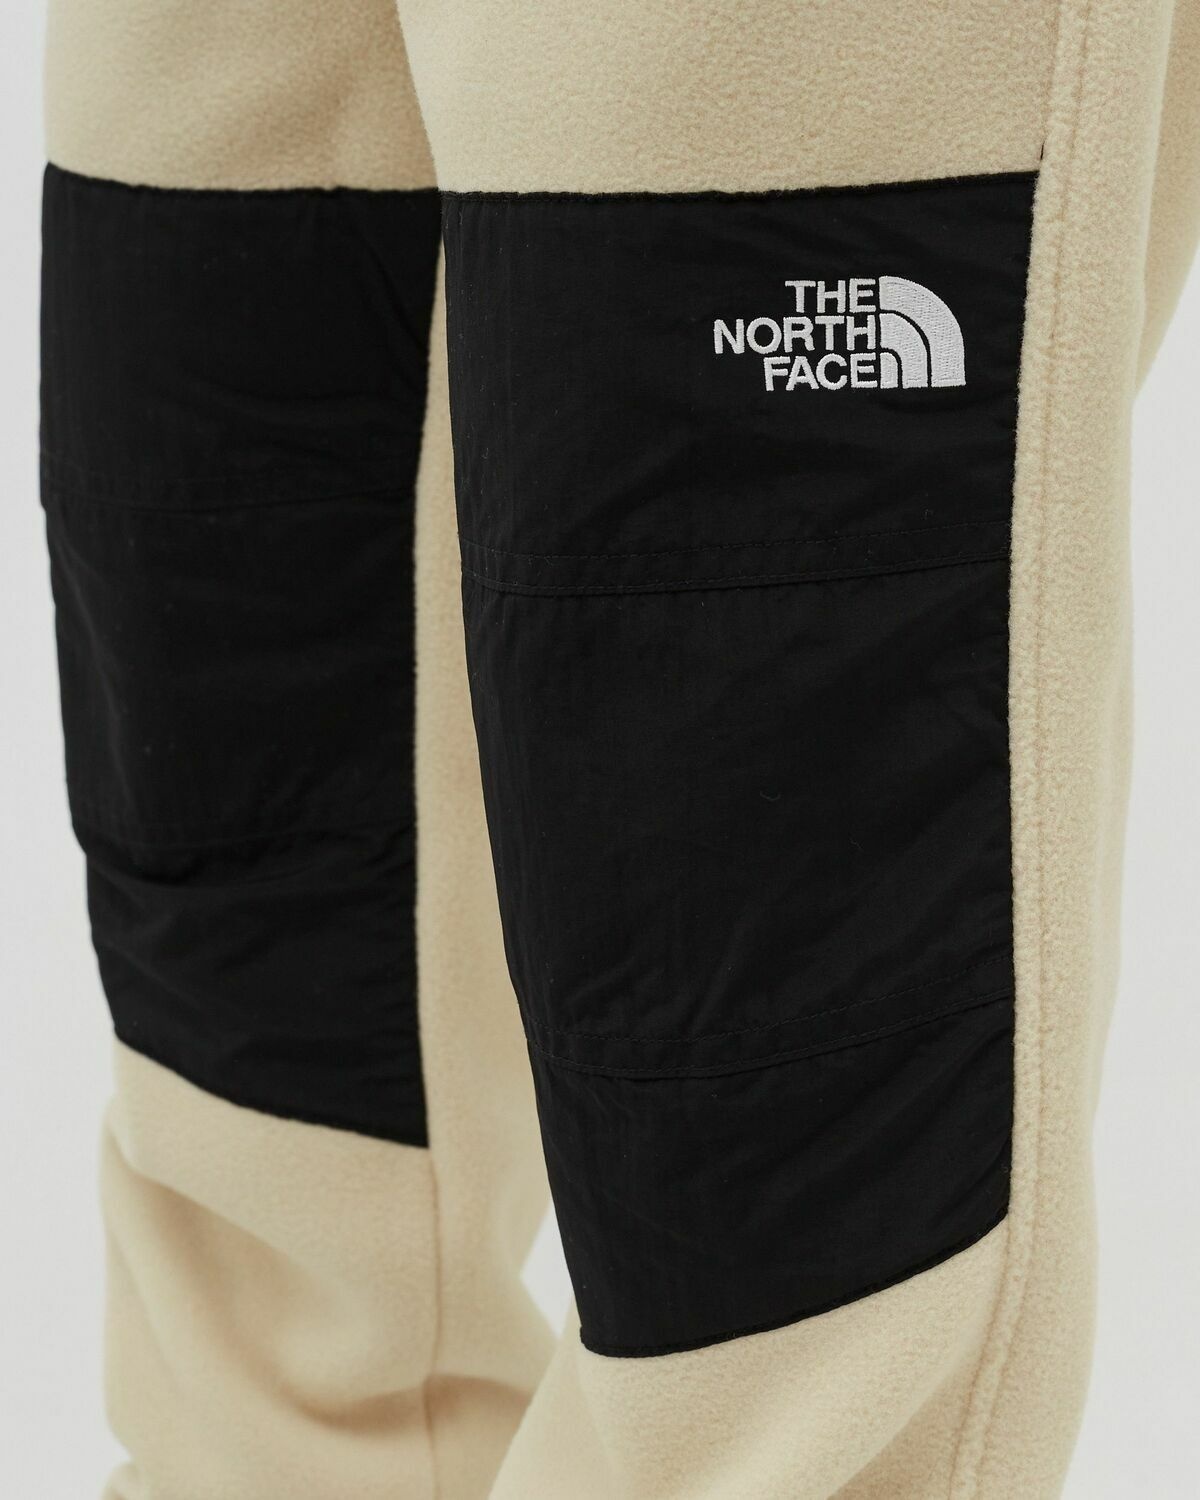 The North Face Denali Pant Beige - Mens - Sweatpants The North Face